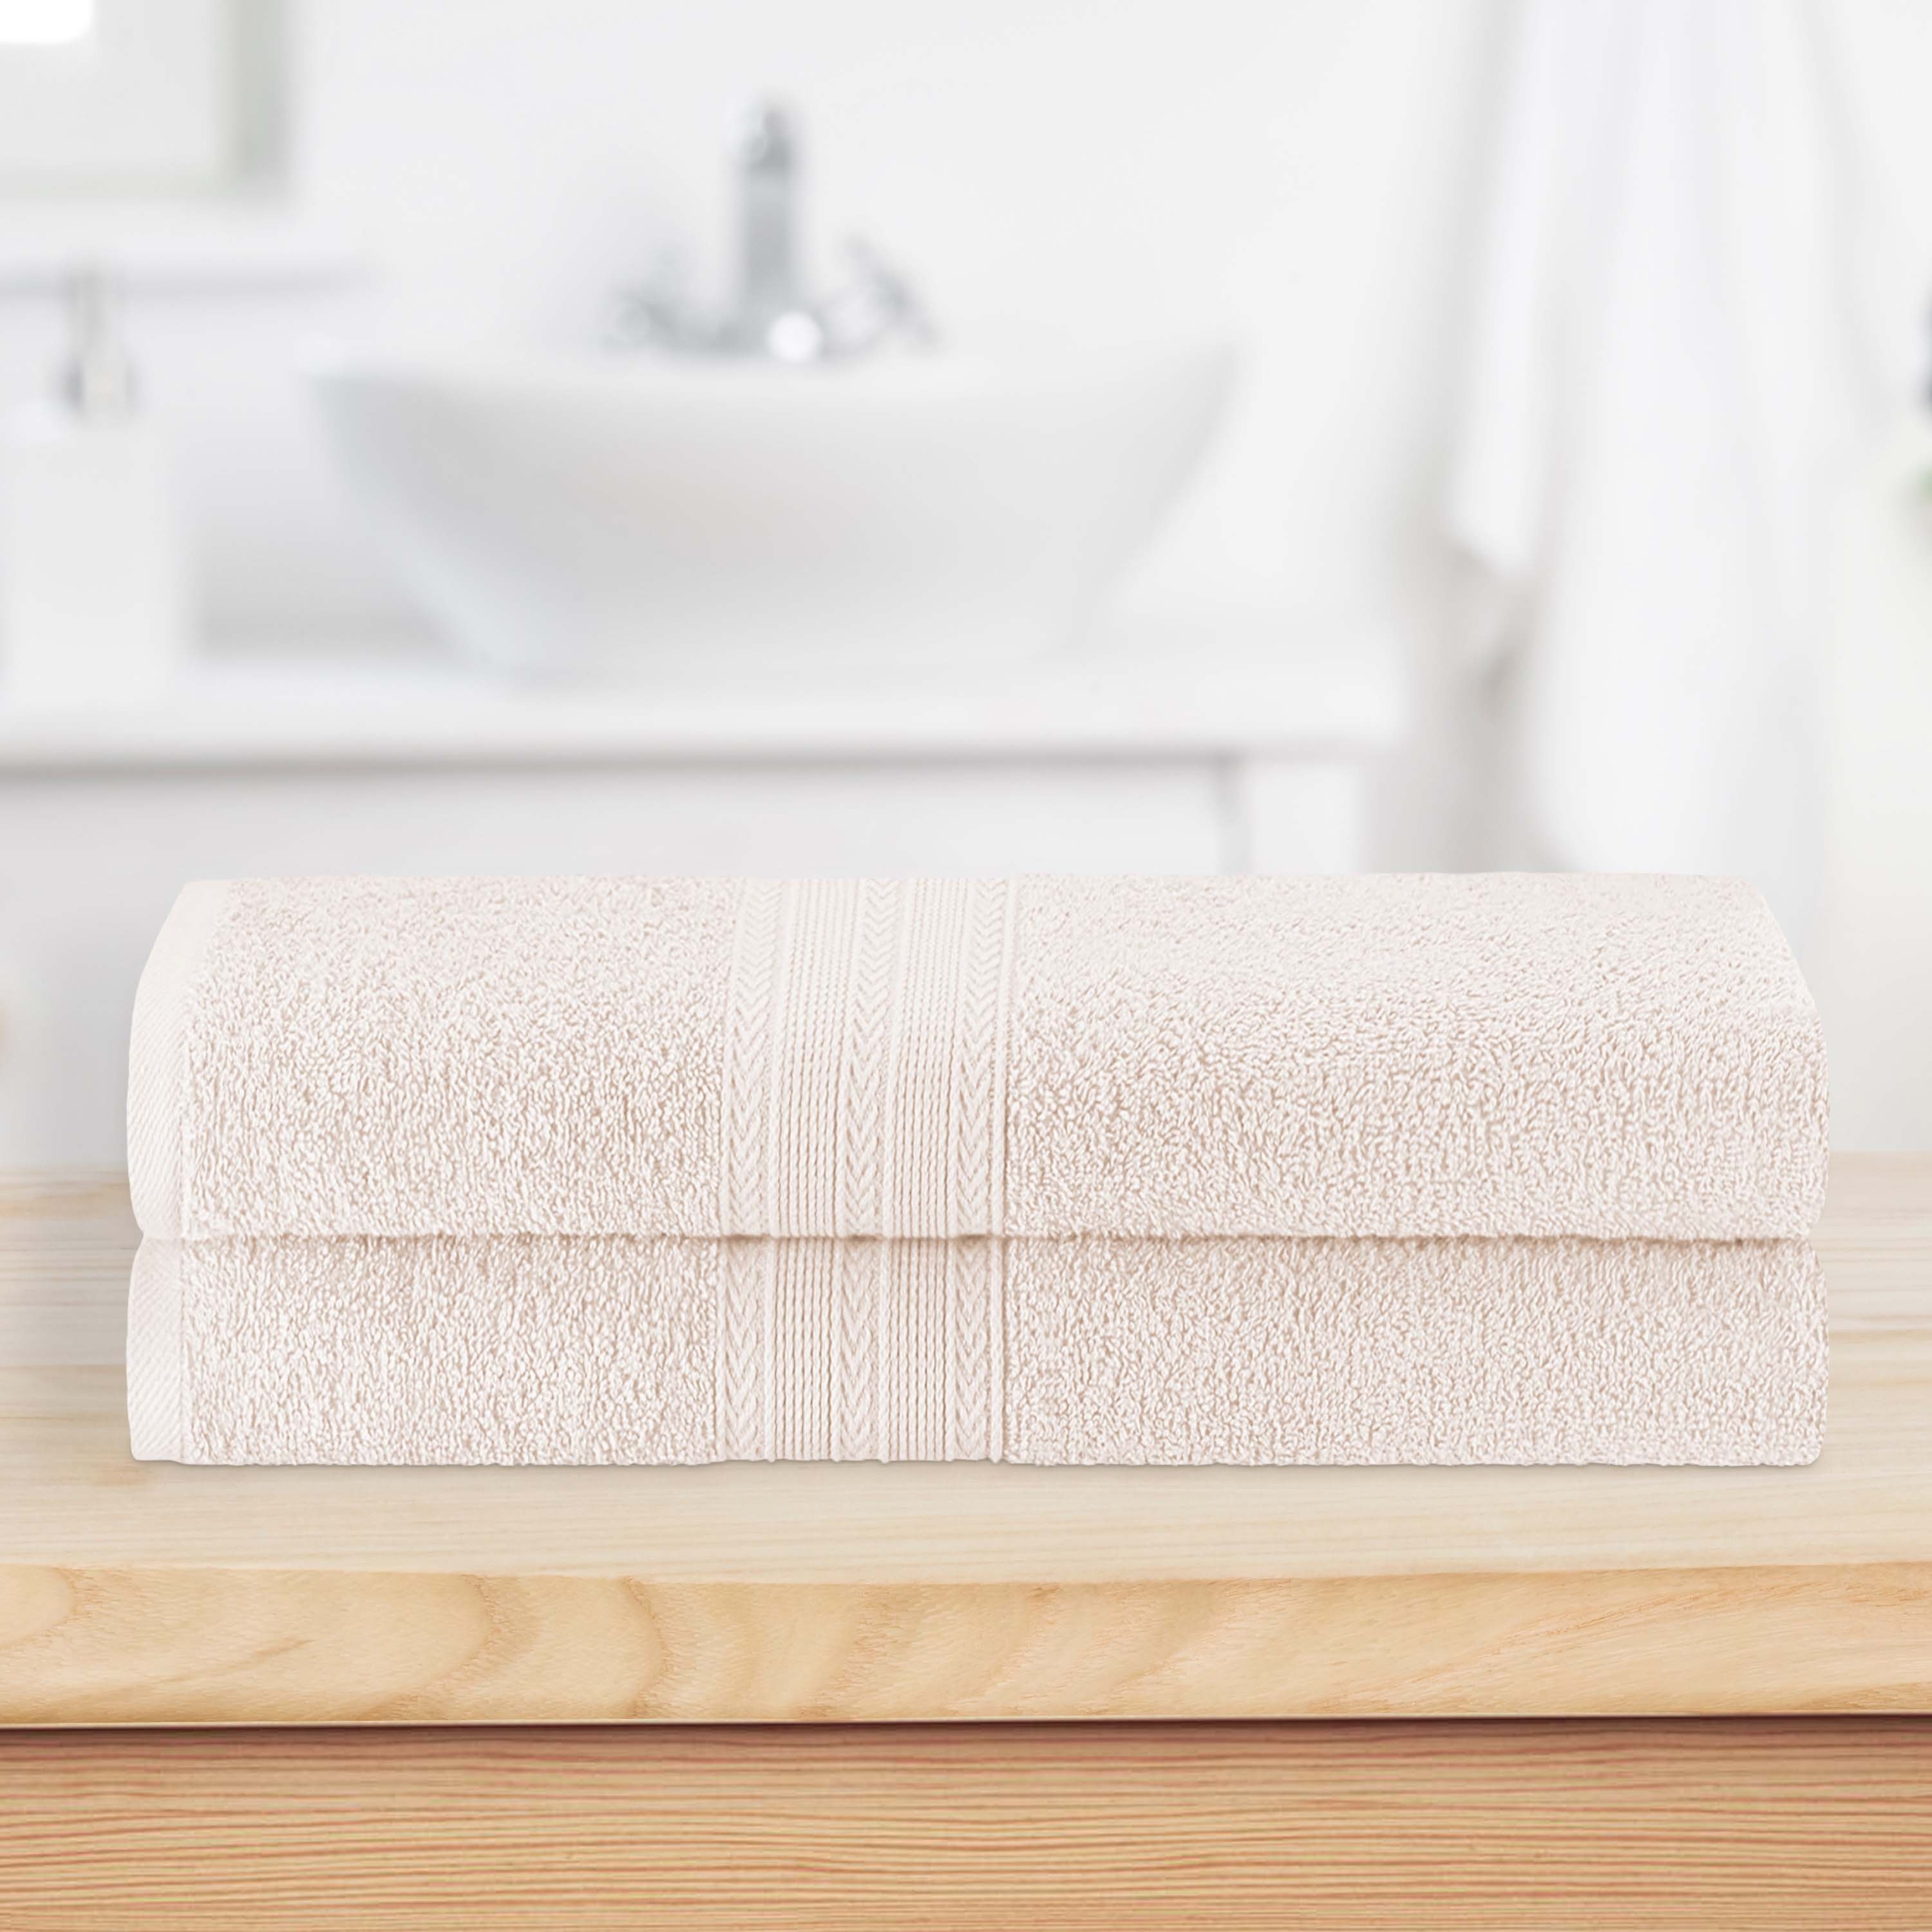 https://ak1.ostkcdn.com/images/products/is/images/direct/589fdbbdc62f024245f35d2331bef05cbf305c44/Eco-Friendly-Sustainable-Cotton-Bath-Sheet-Set-of-2-by-Superior.jpg